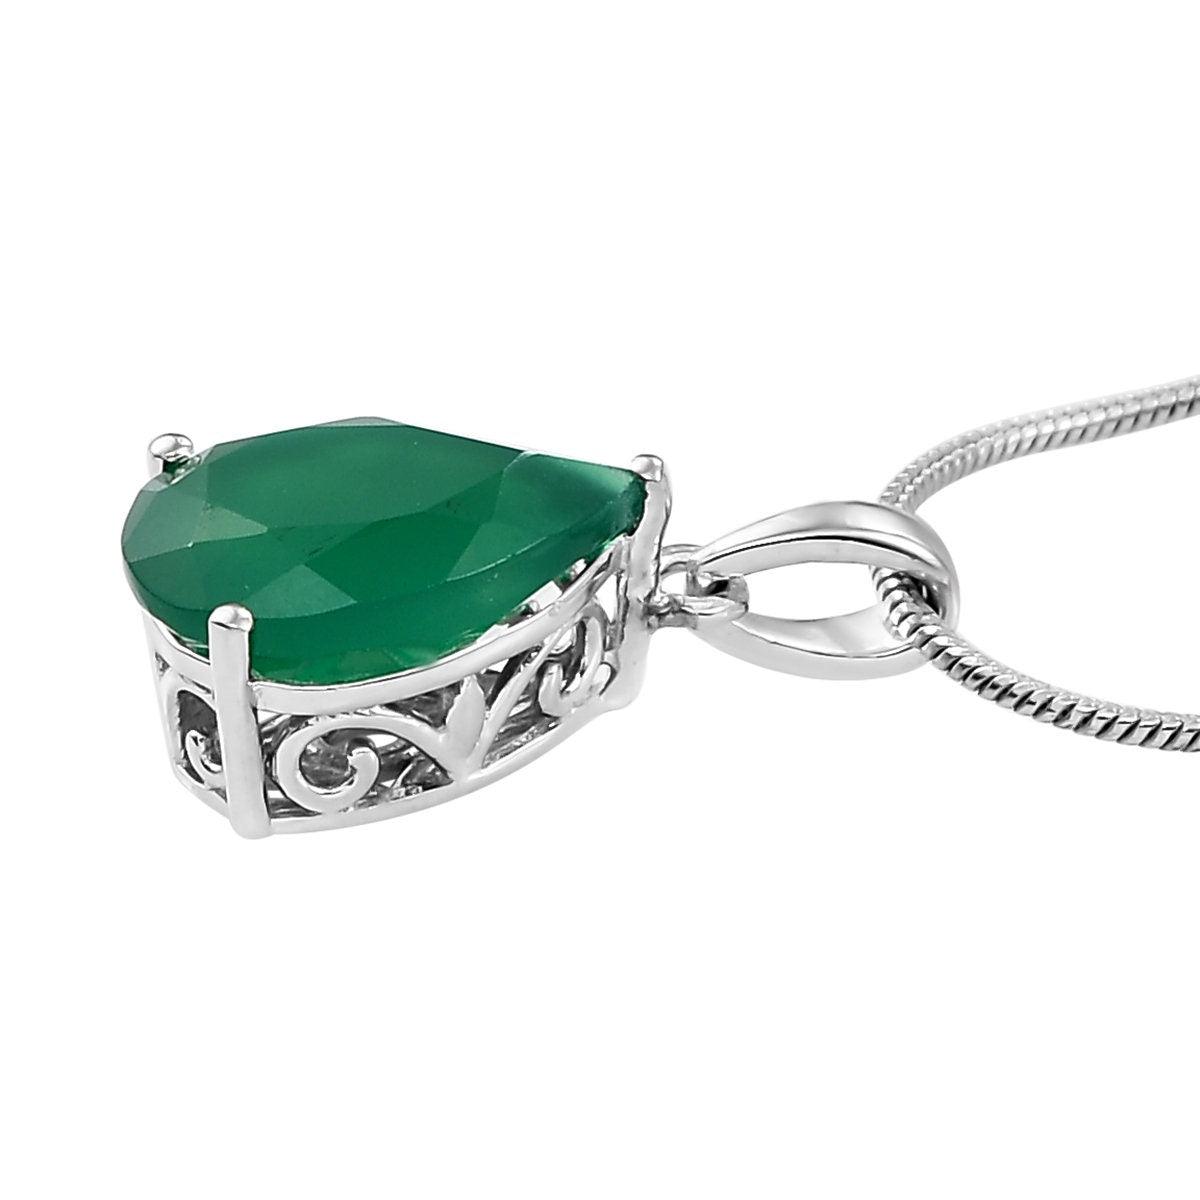 Genuine Green Onyx Pendant, Solitaire Pendant Necklace, May Birthstone Necklace, 925 Sterling Silver, Gift for her - Inspiring Jewellery